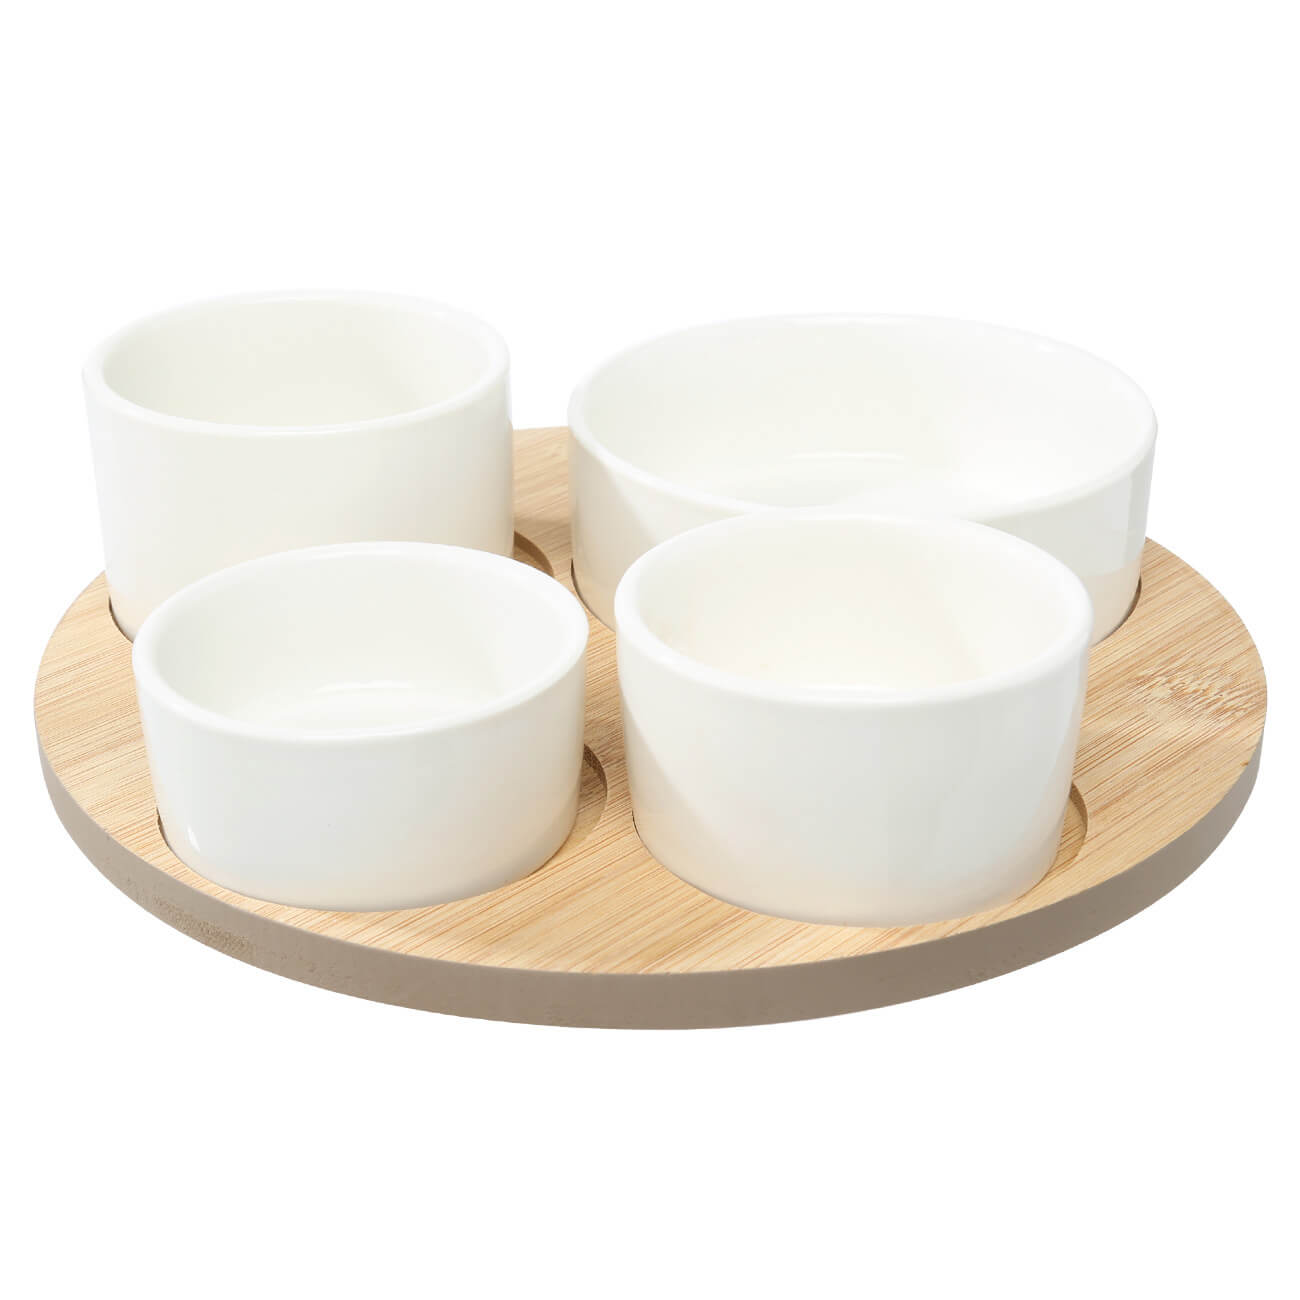 Snack set, 4 pcs, on a stand, ceramic / bamboo, white, round bowls, Bamboo изображение № 1